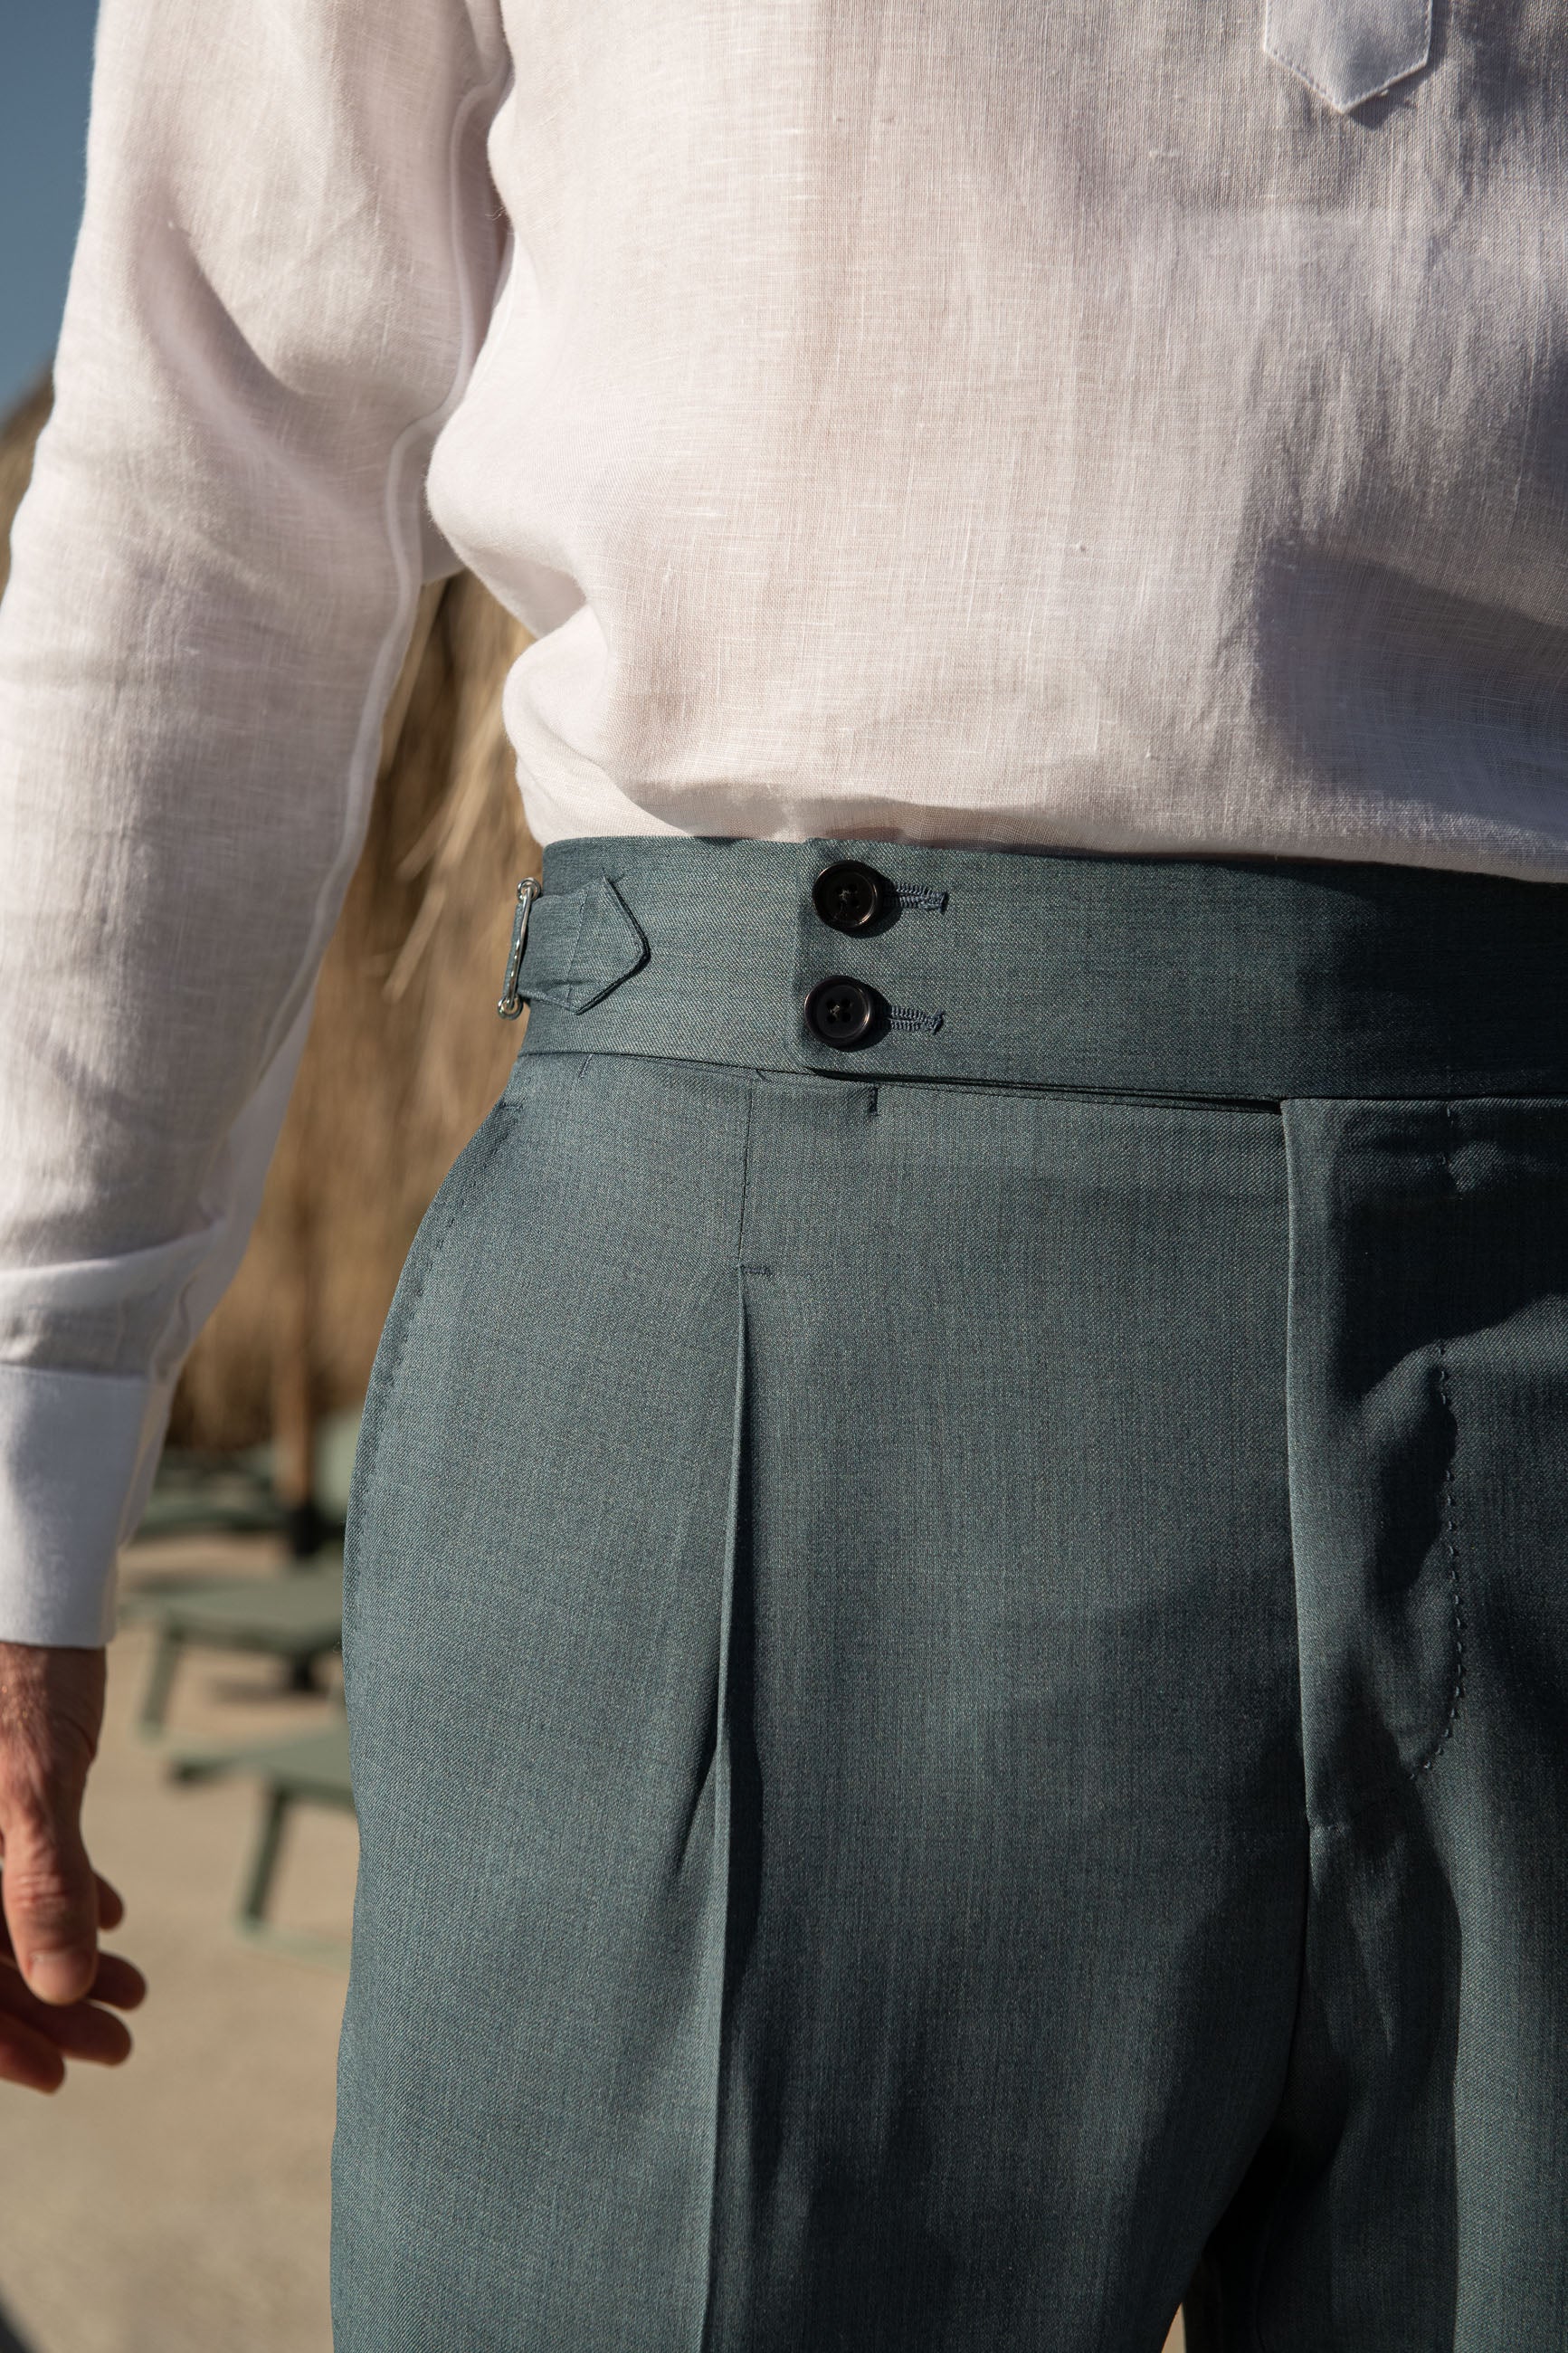 Water green Trousers "Soragna Capsule Collection" - Made in Italy